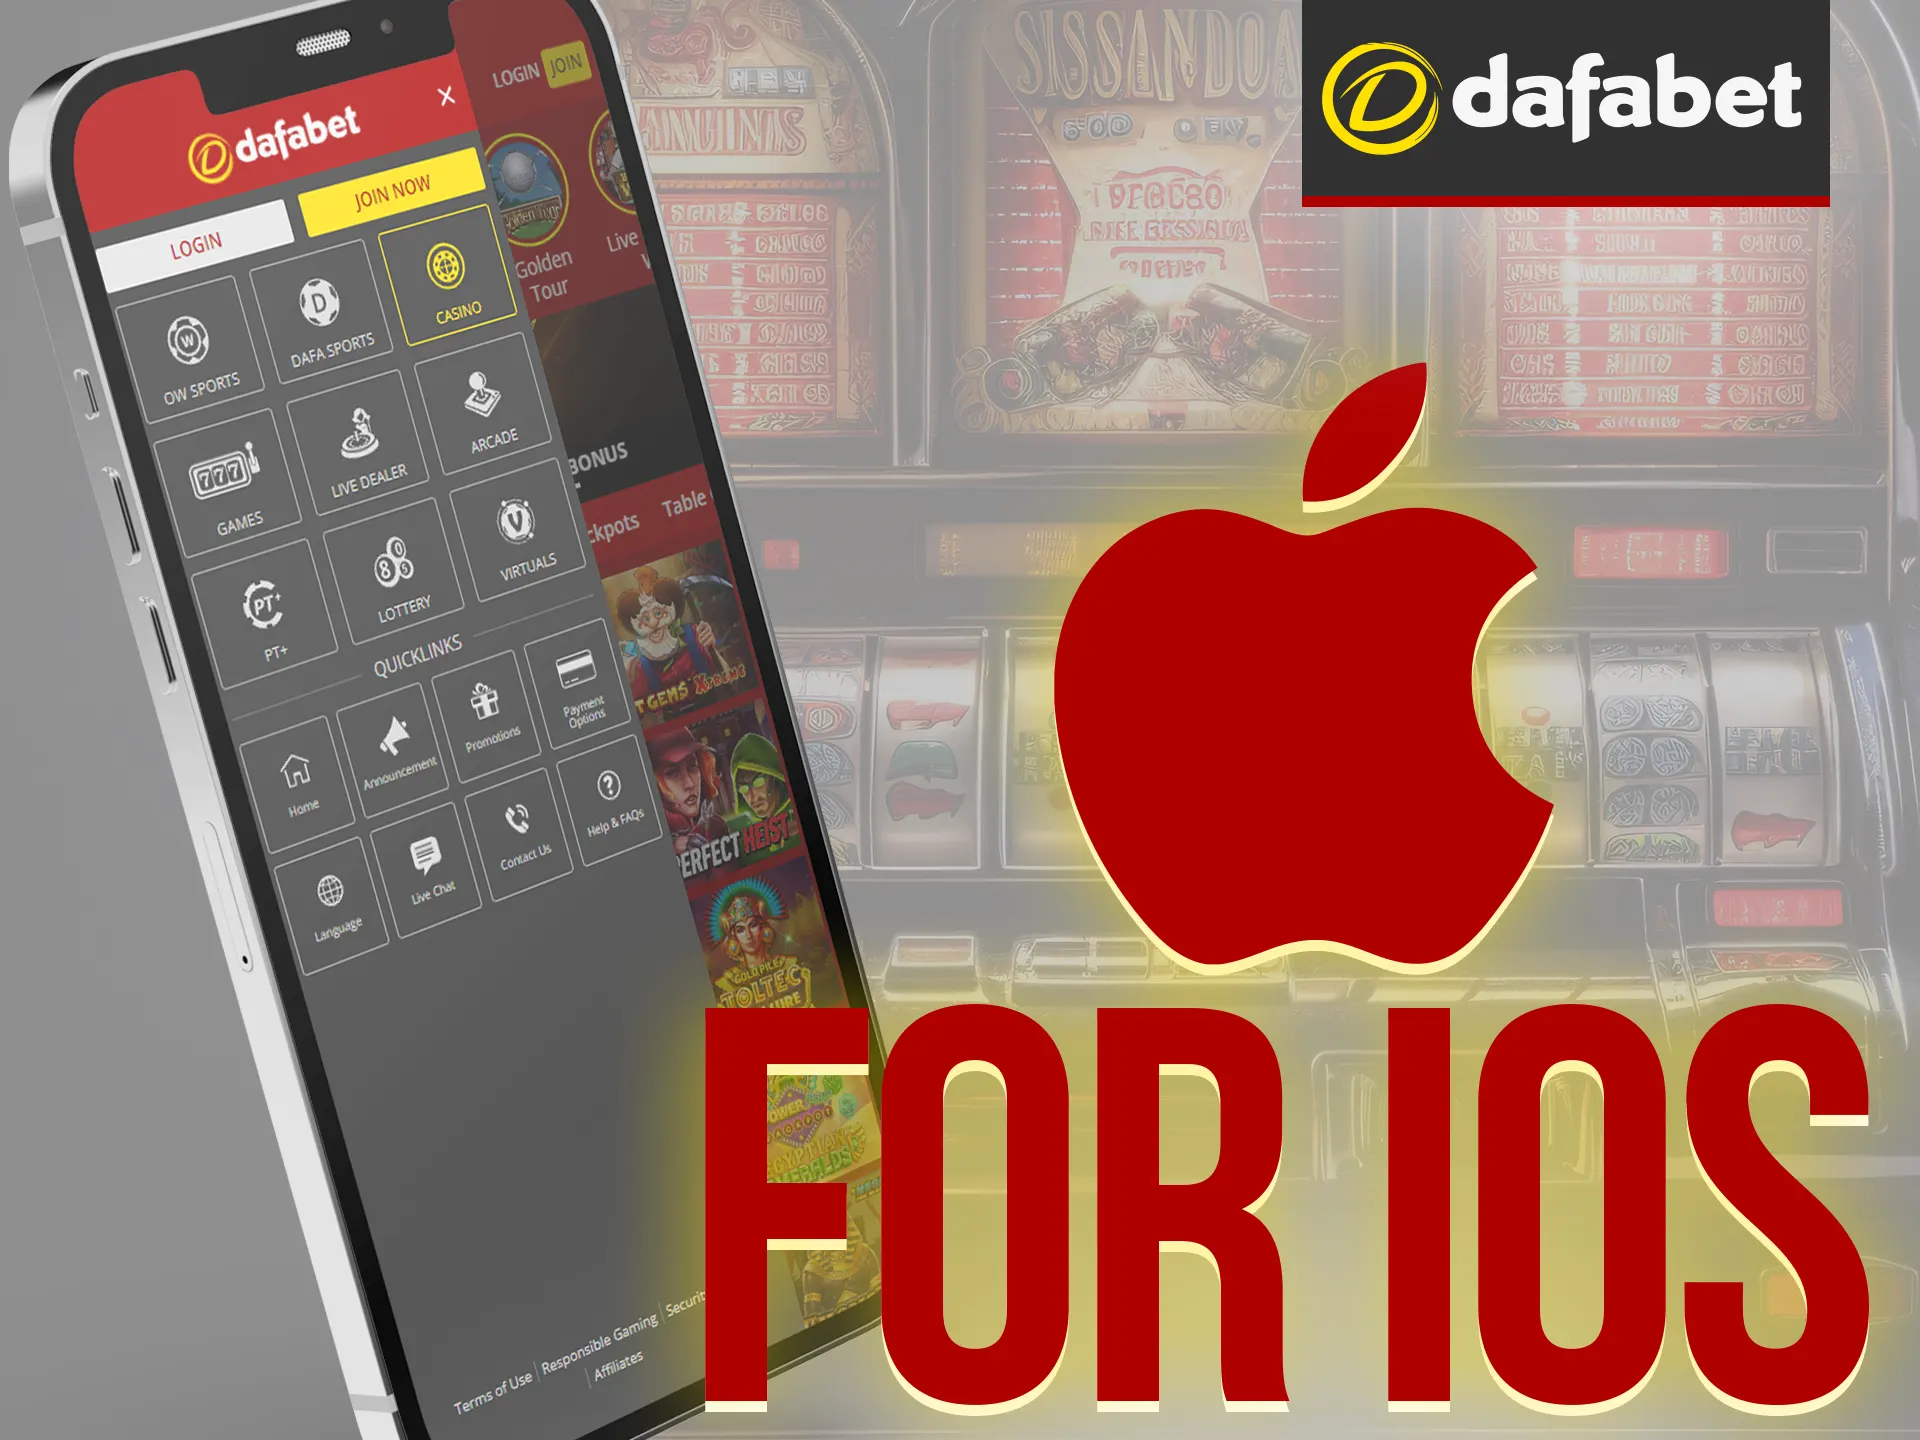 Access the official marketplace iOS app link, read the Dafabet app description and install.